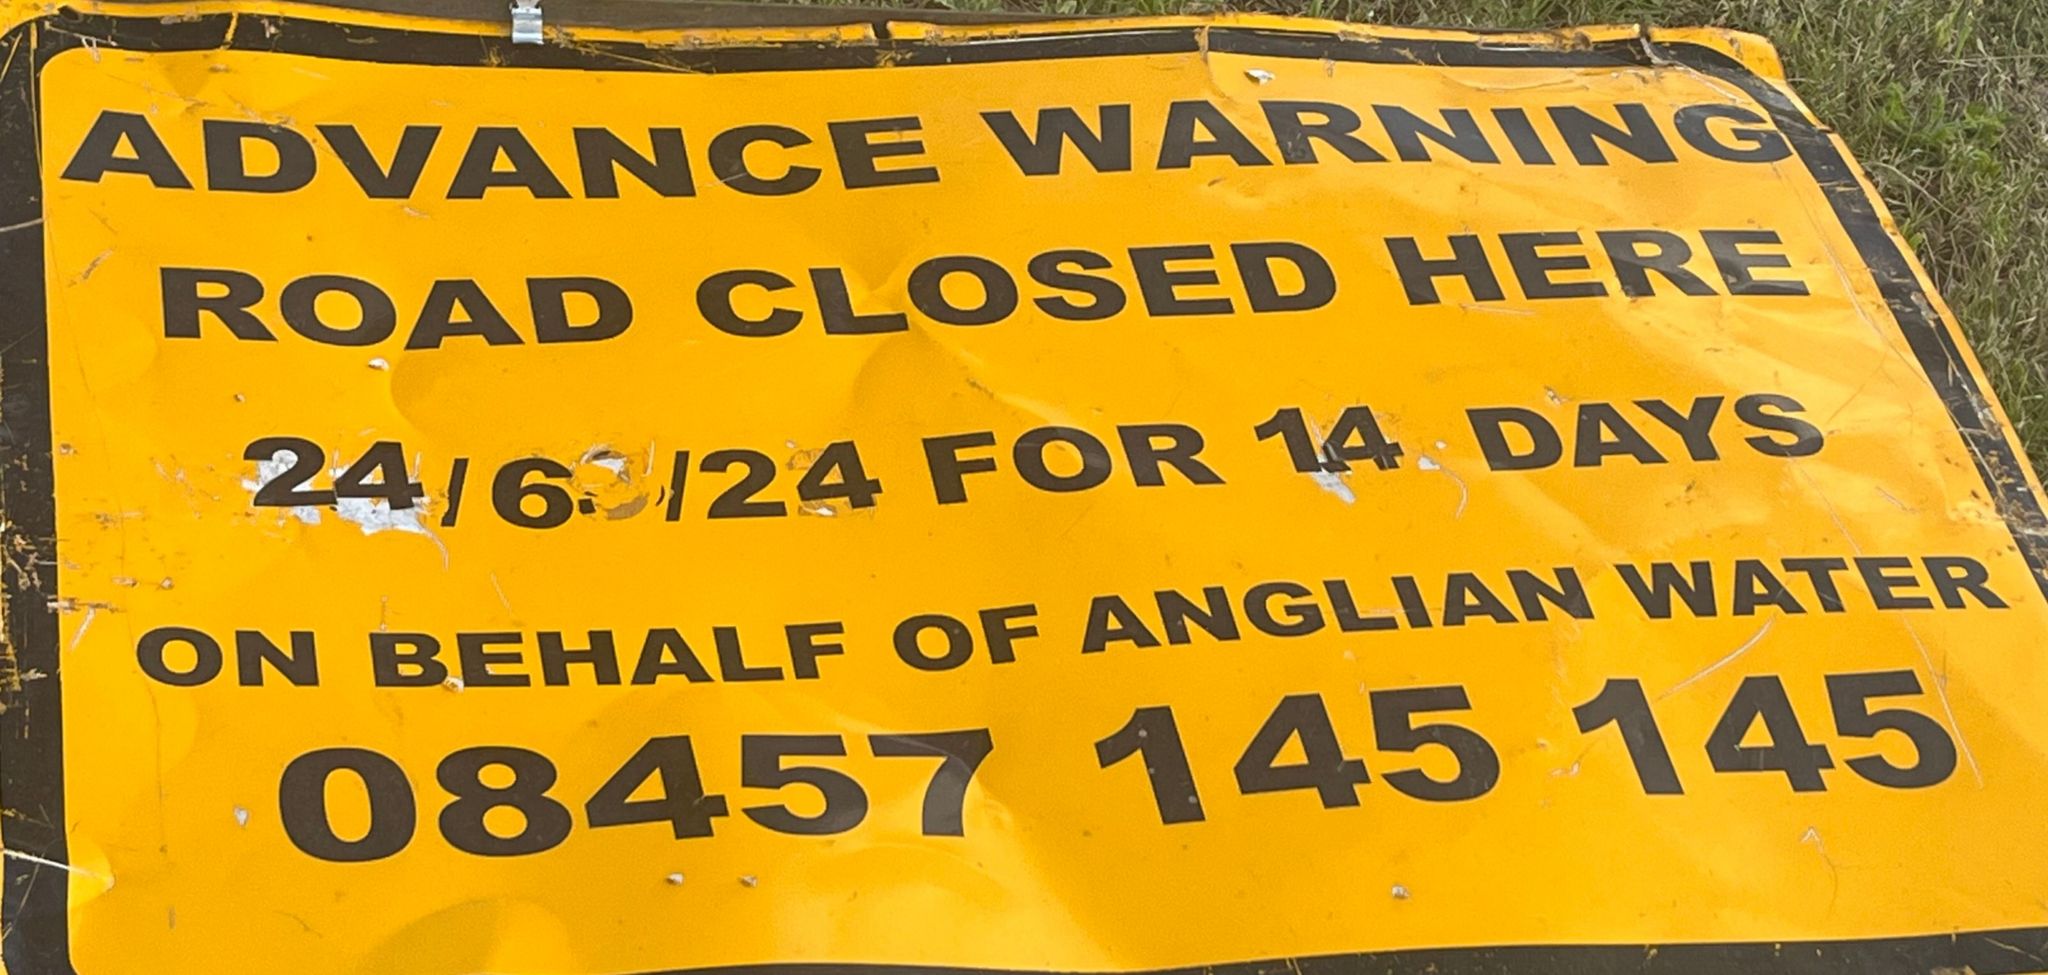 A sign saying 'Advance warning road closed here. 24/6/24 for 14 days on behalf of Anglian Water 08457 145 145'